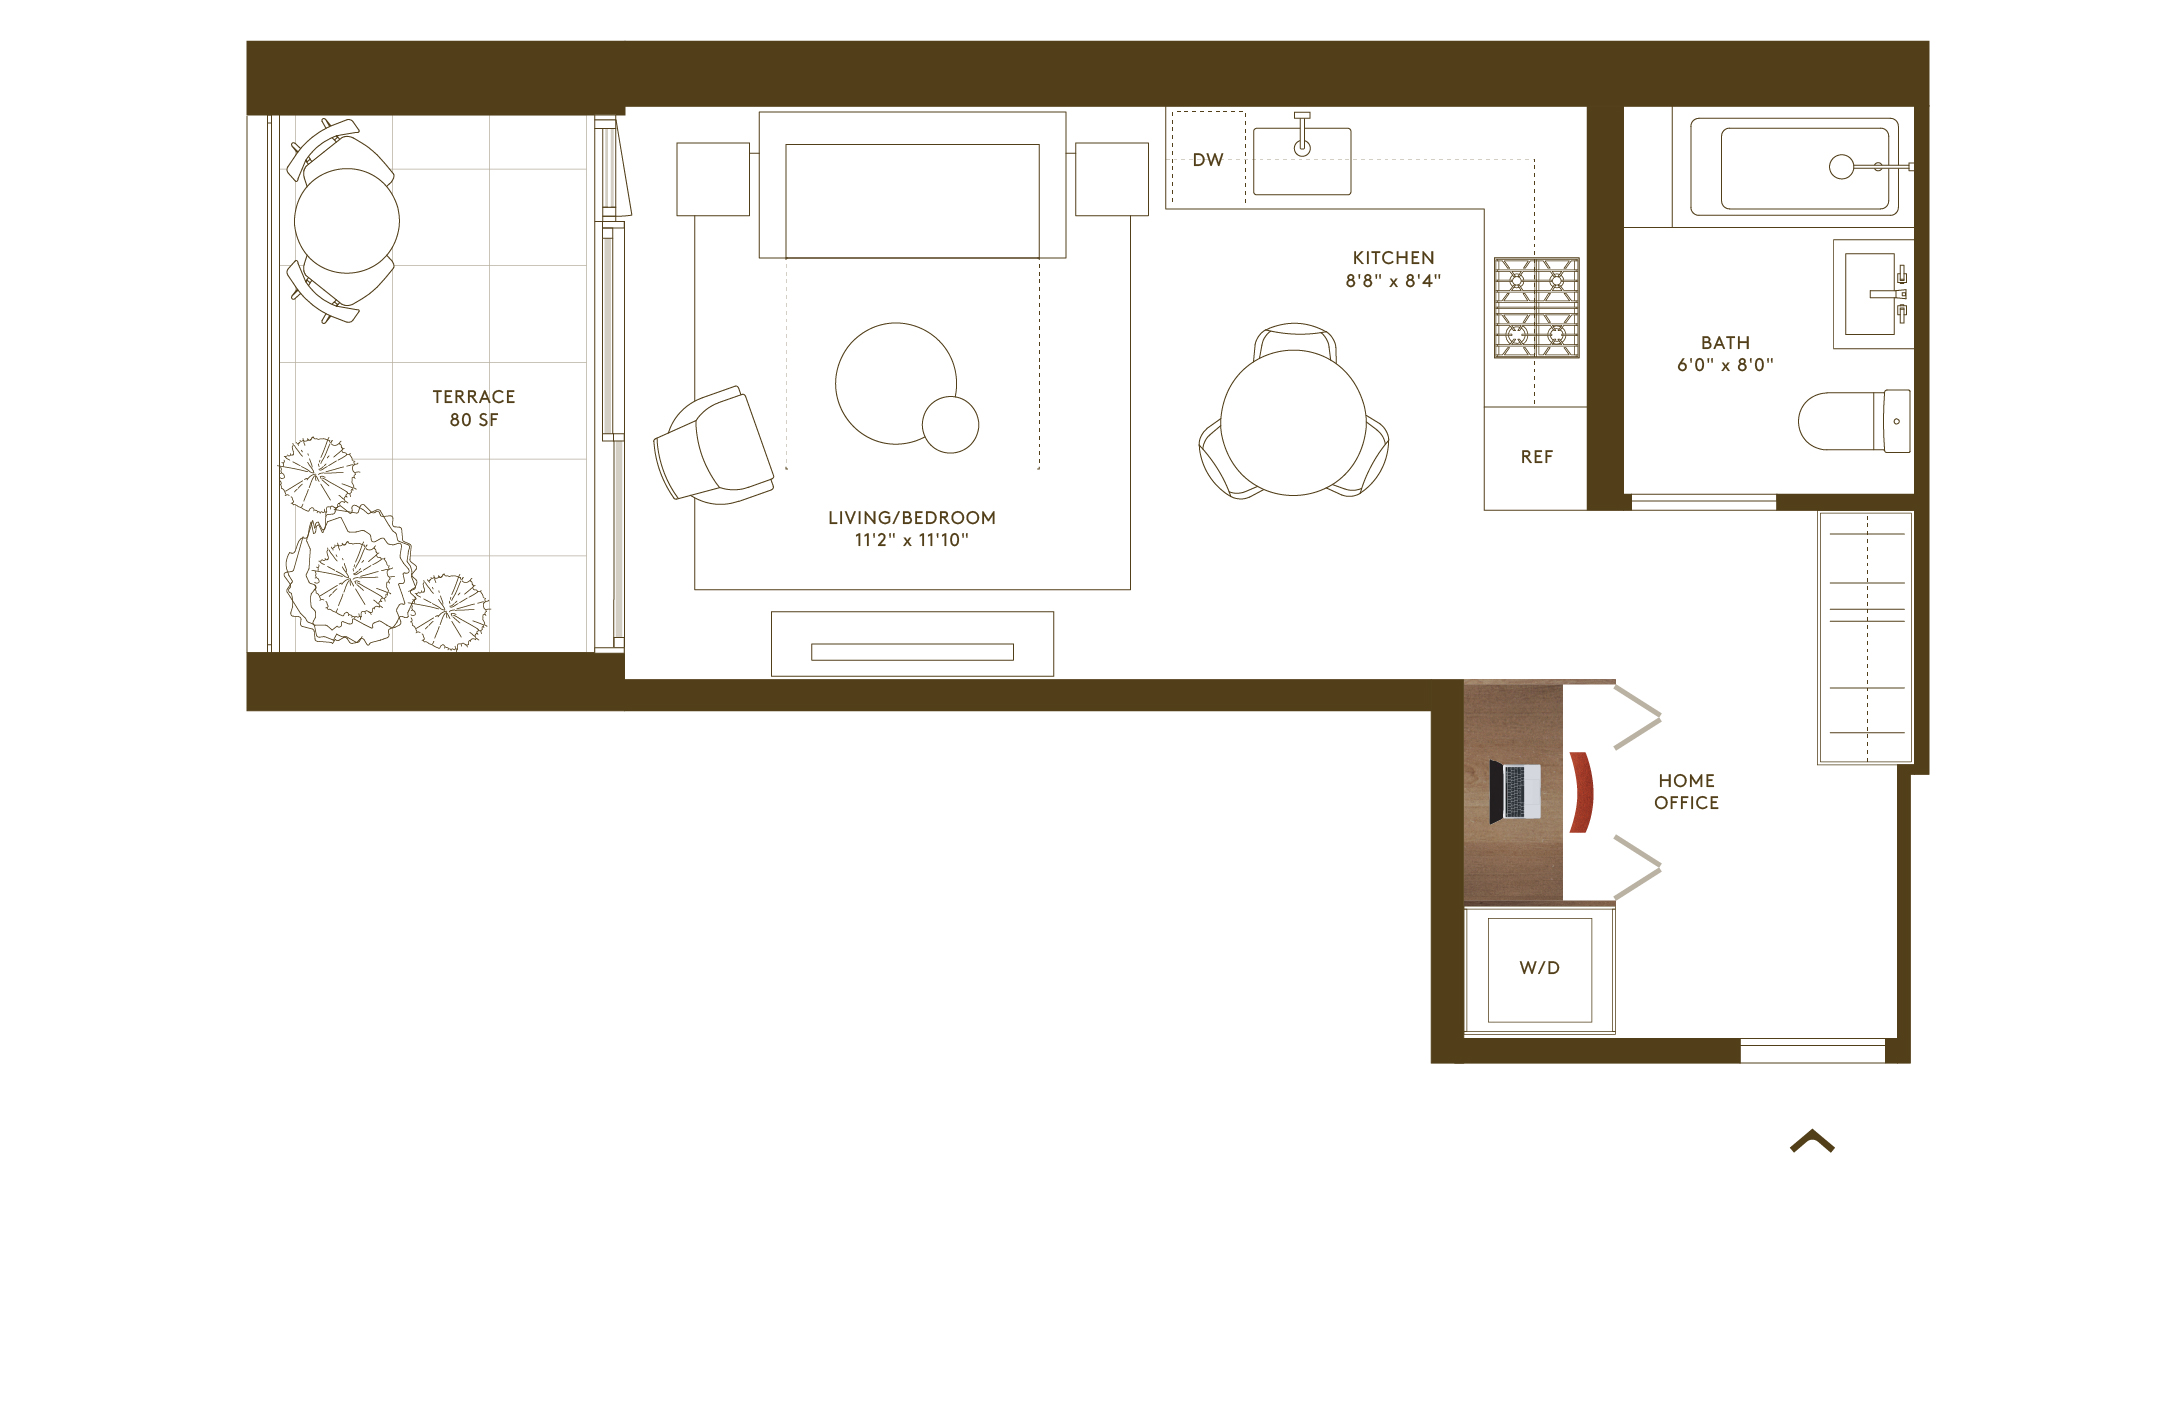 Floorplan of Studio Condo with Home Office and Terrace at Hendrix House Condominium in Gramercy NYC.